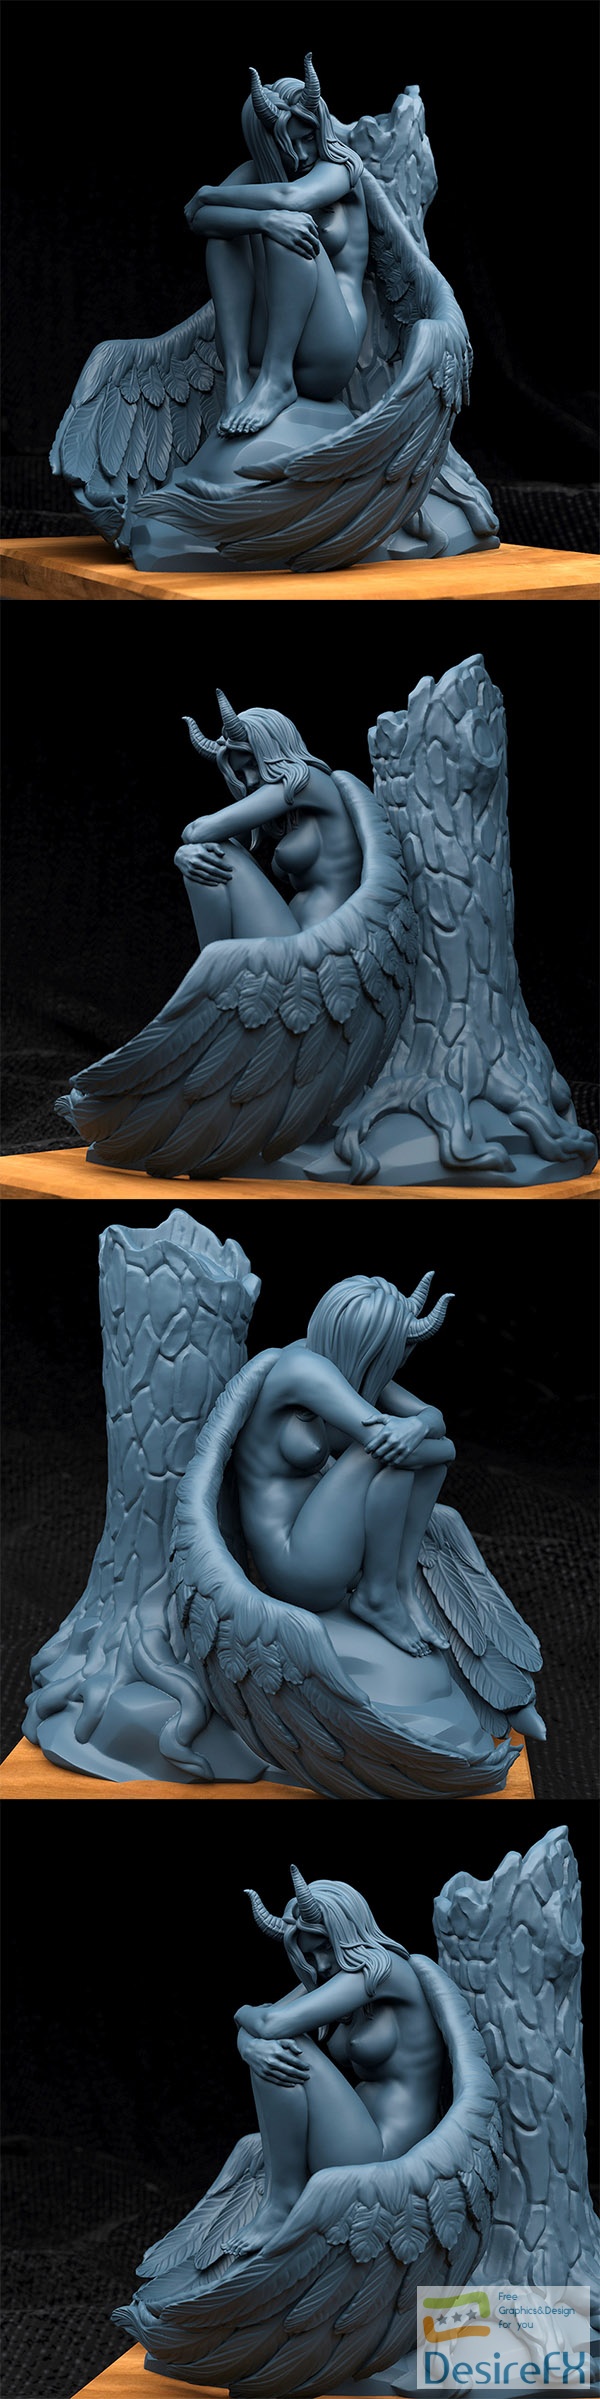 Creature Armory - The Fallen Angel - 3D Print